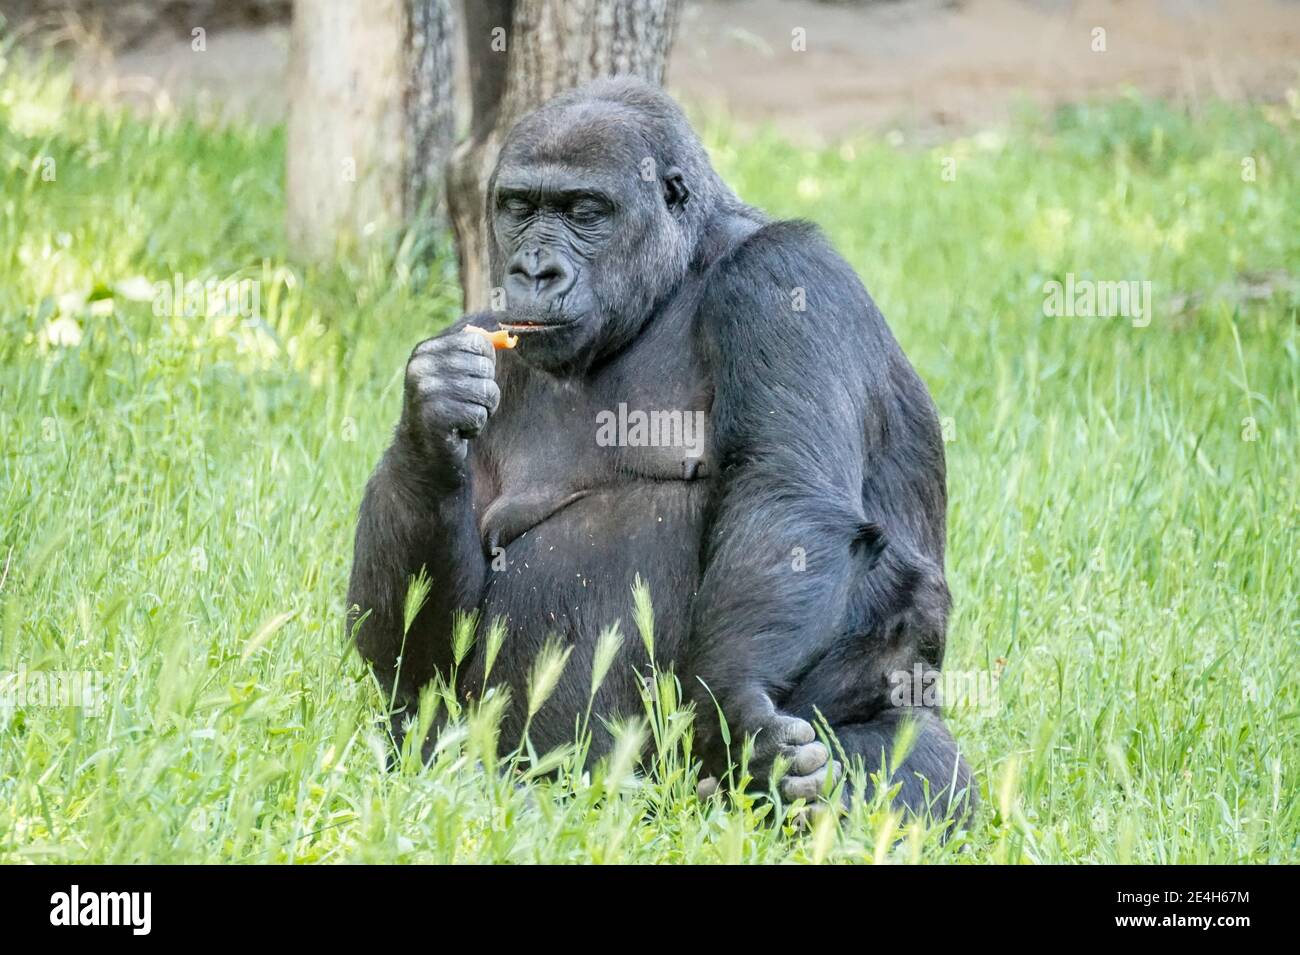 Old chimpanzee monkey sitting in grass and eating something Stock Photo